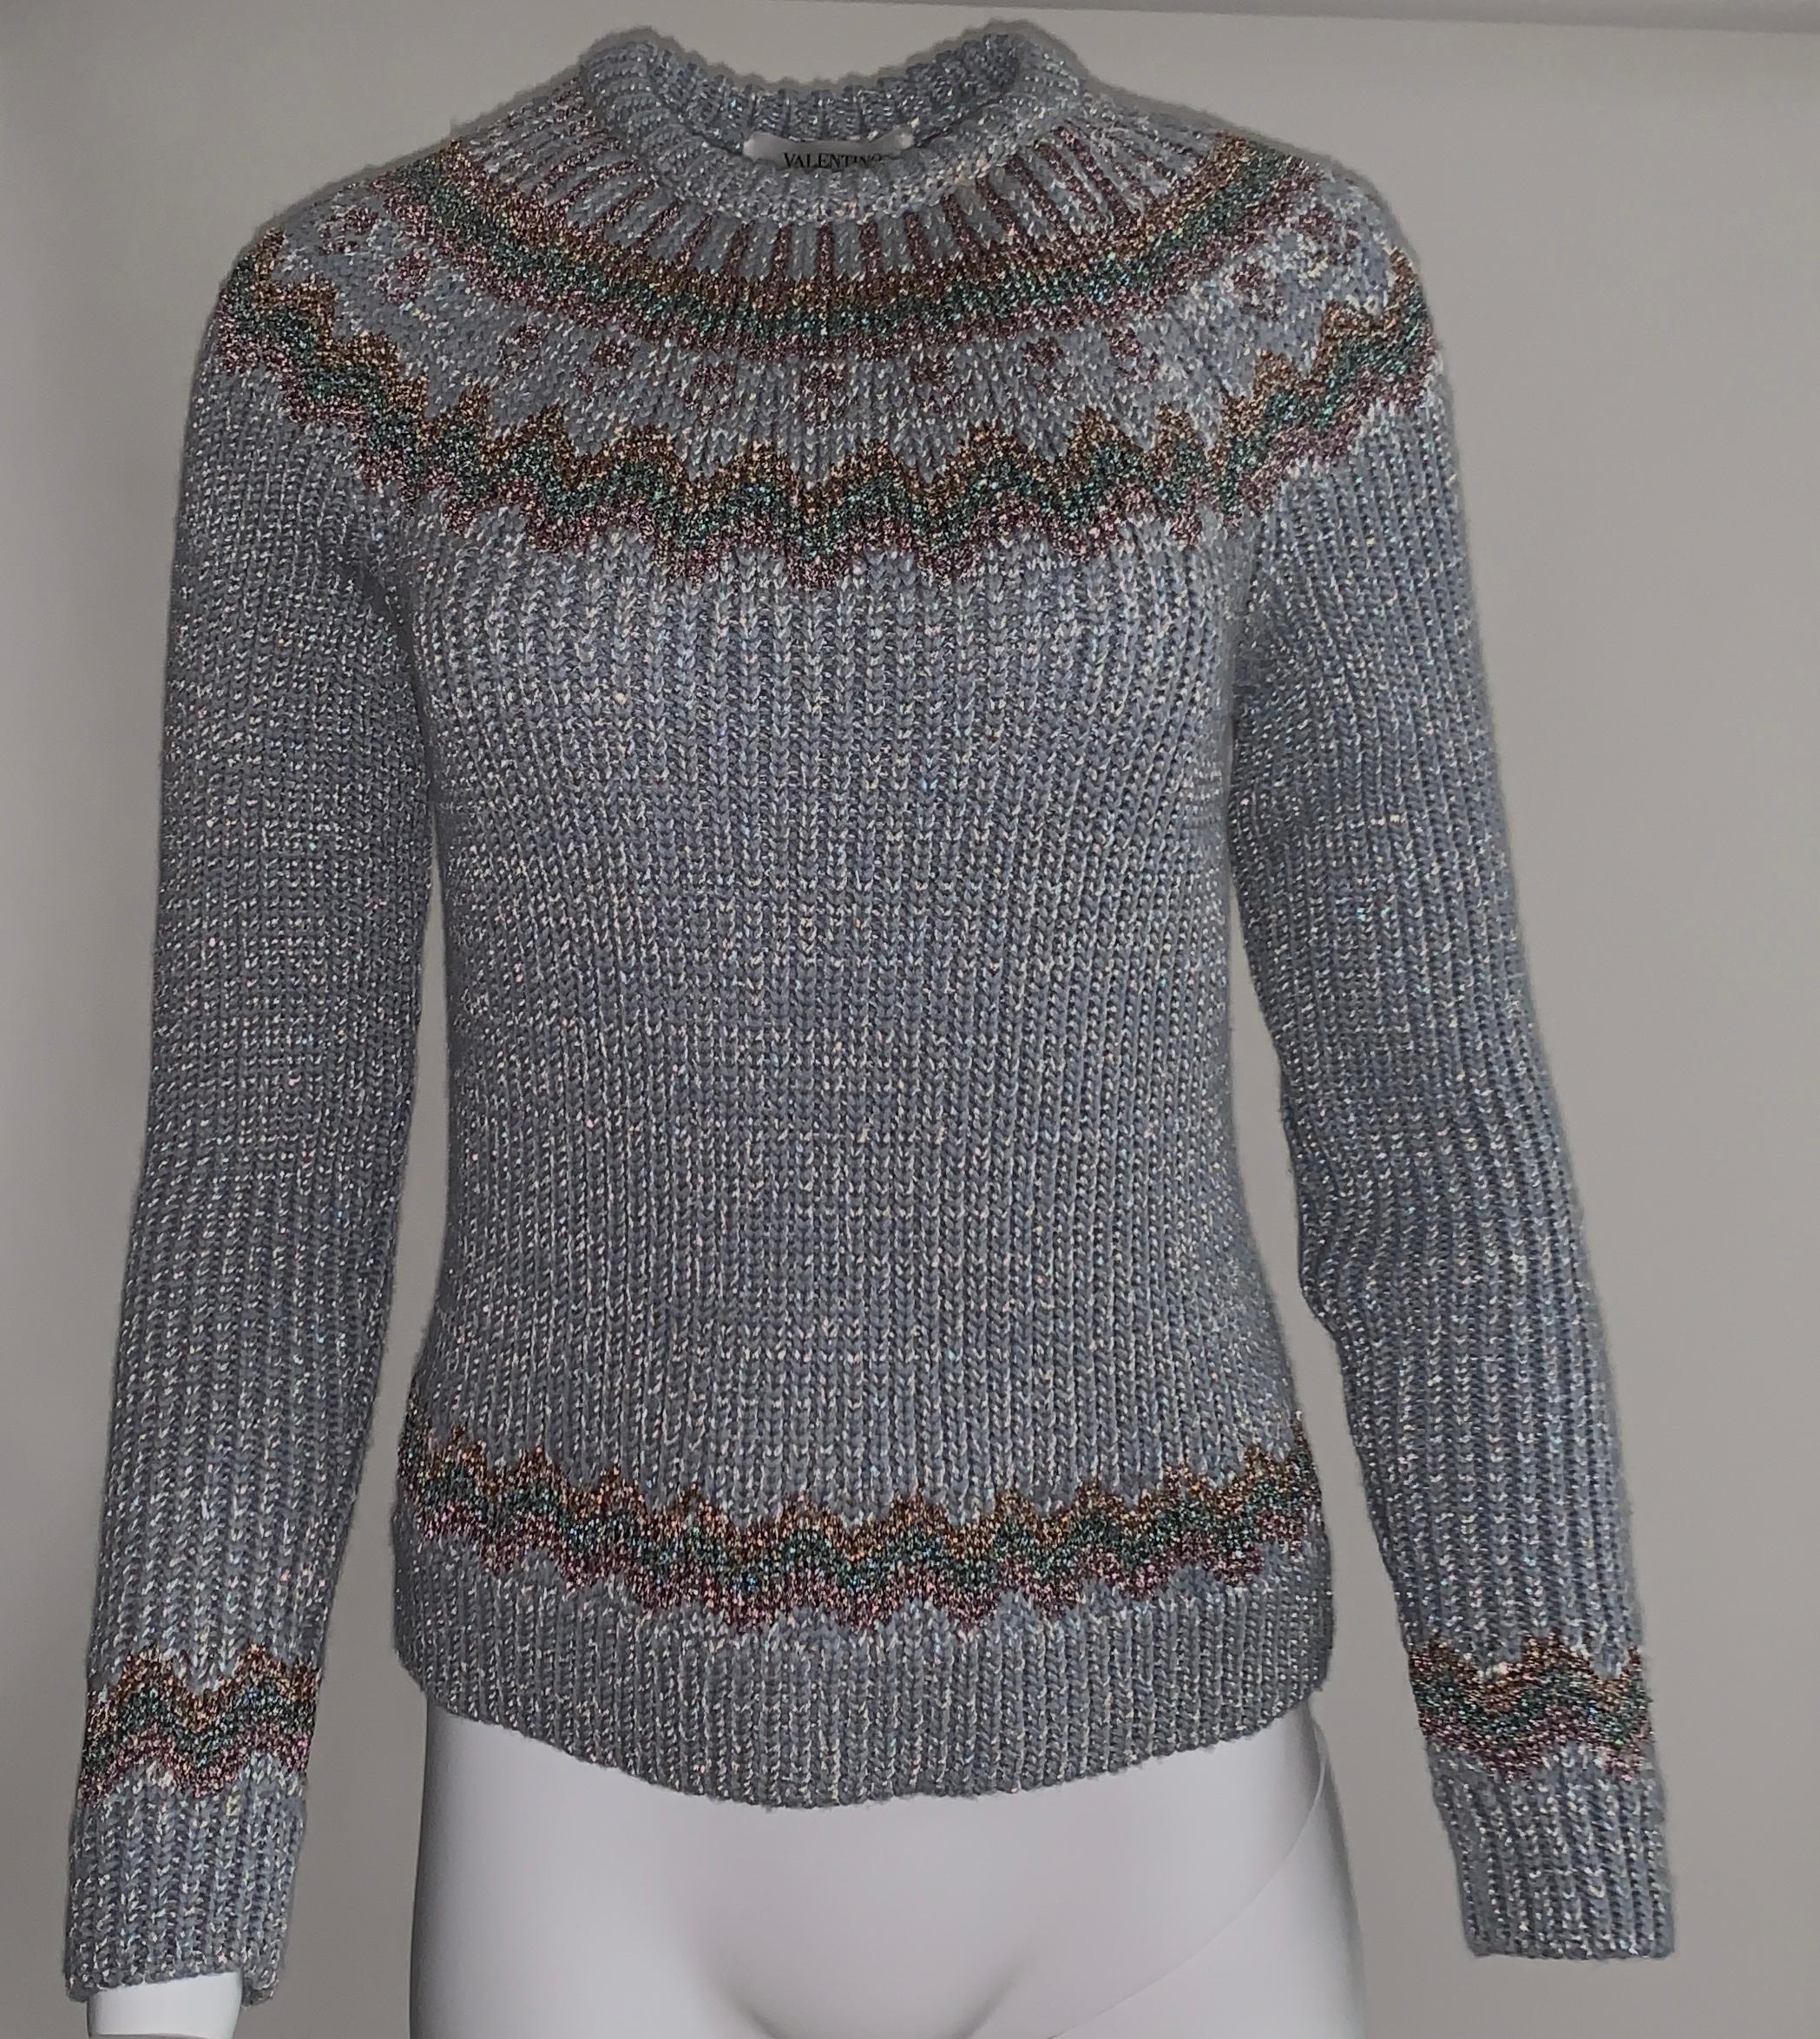 Valentino wide rib knit grey grey sweater with metallic pink and turquoise fair isle detailing and silver metallic accents throughout. Crew neck, long sleeve.

43% viscose, 42% wool, 15% metallic.

Made in Italy.

Size XL, may run a bit small, see